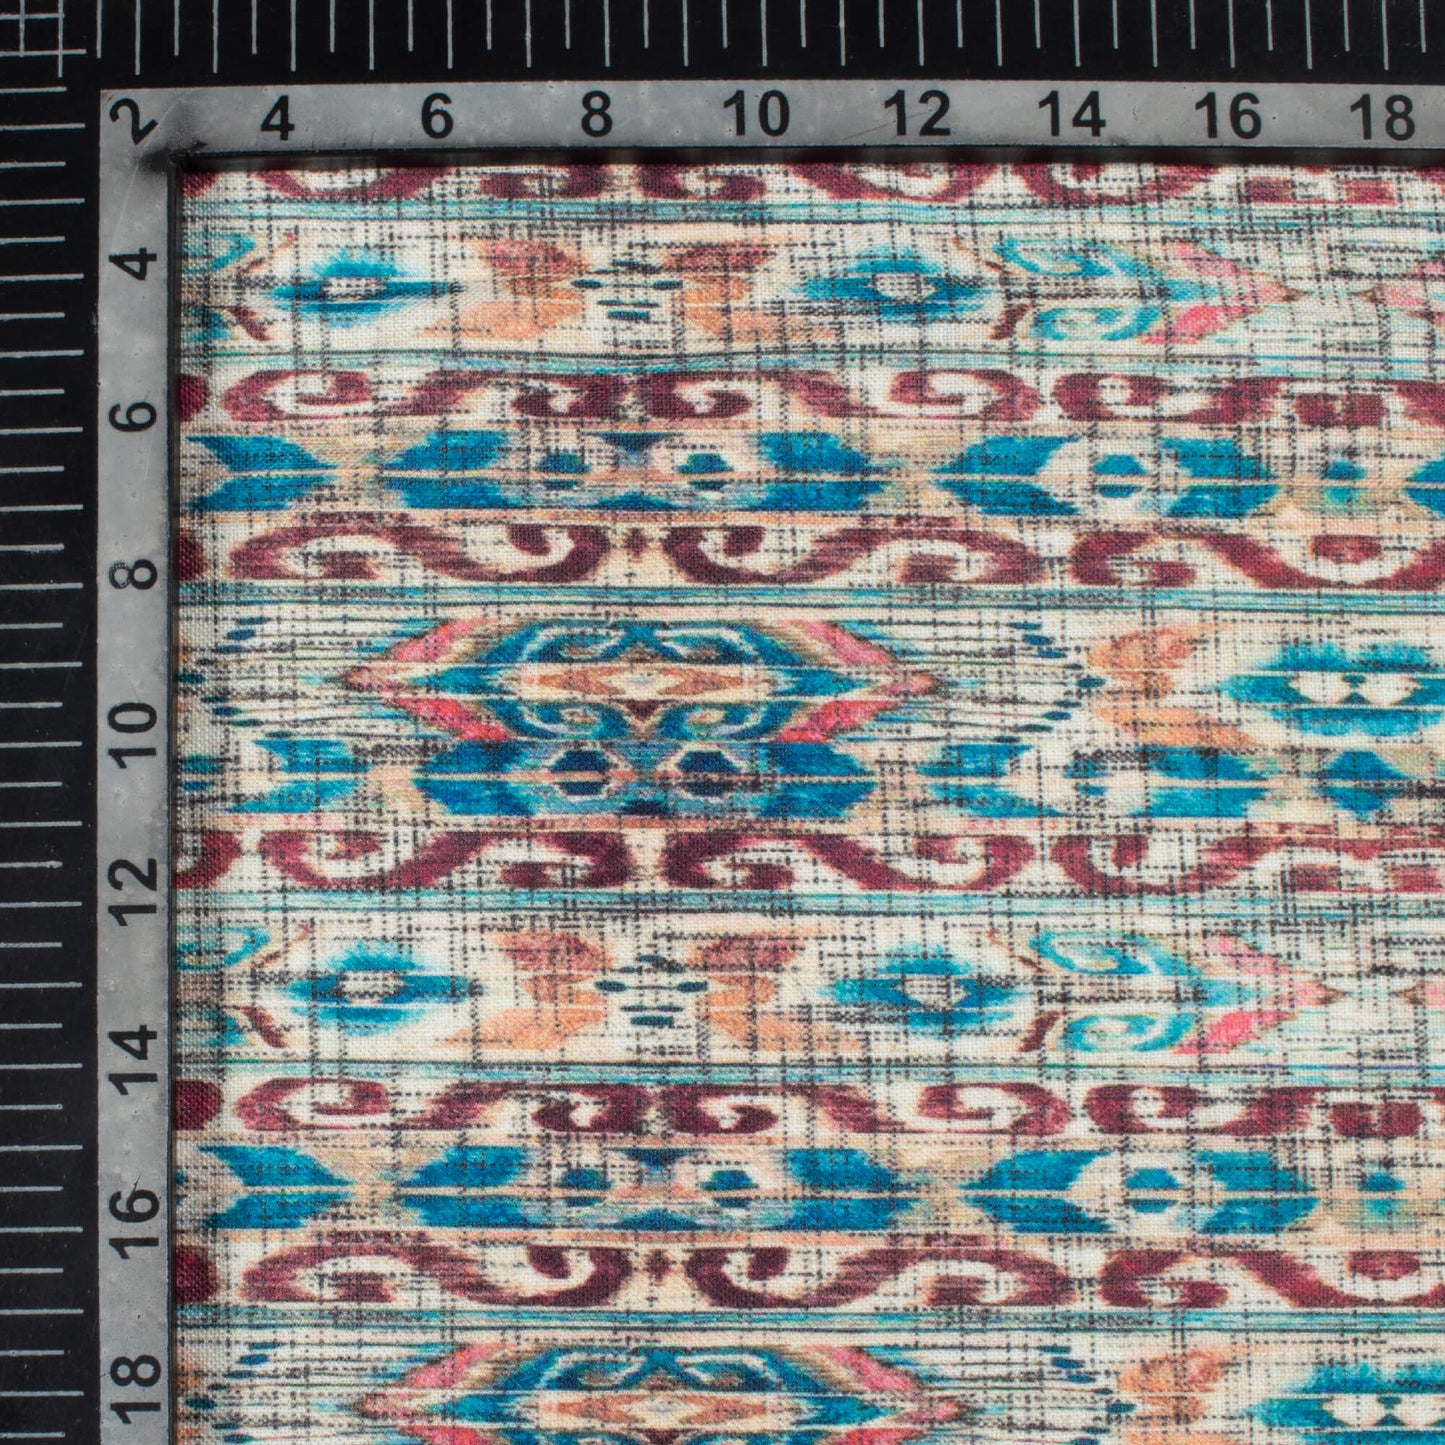 Teal Green And Hickory Brown Ethnic Pattern Digital Print Linen Textured Fabric (Width 56 Inches)